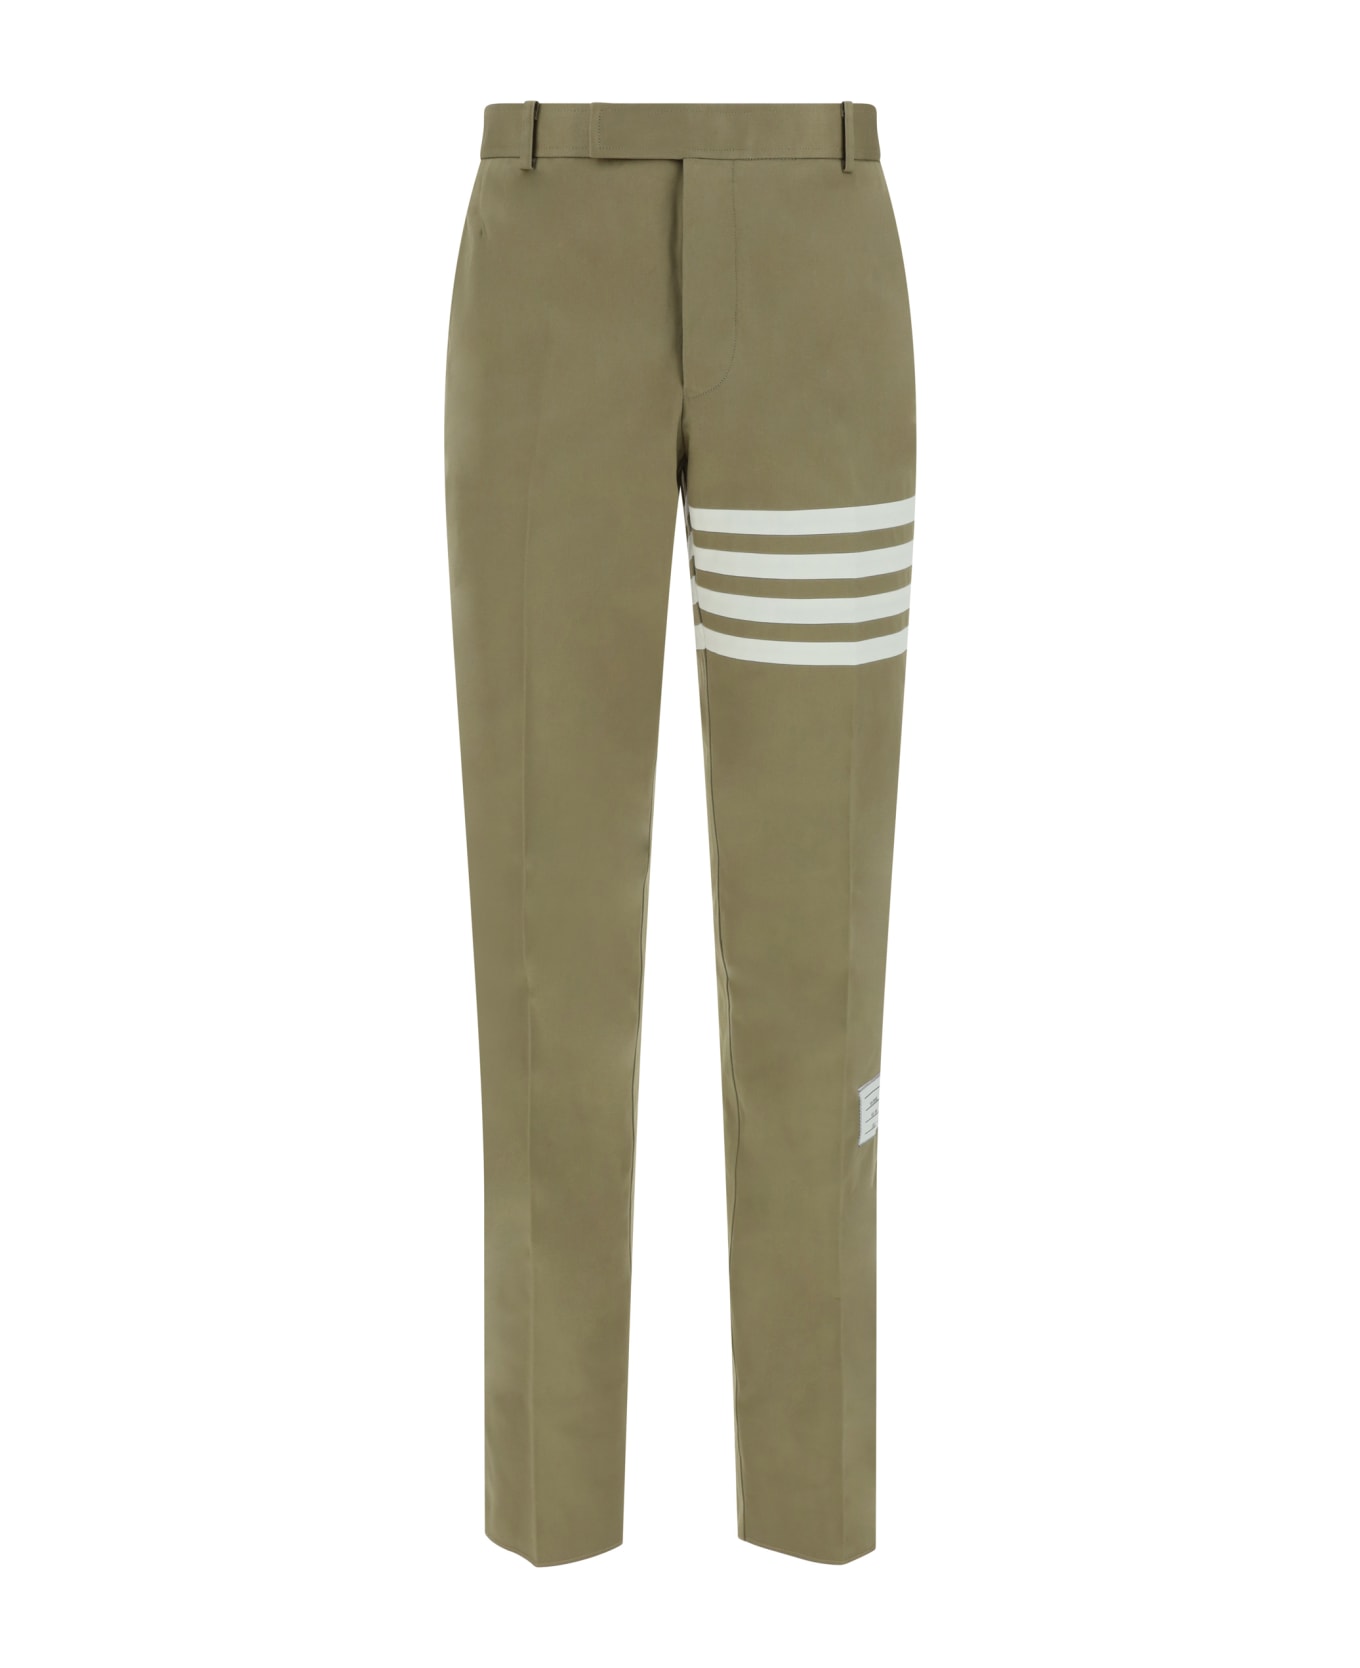 Thom Browne Chino Trousers - Camel